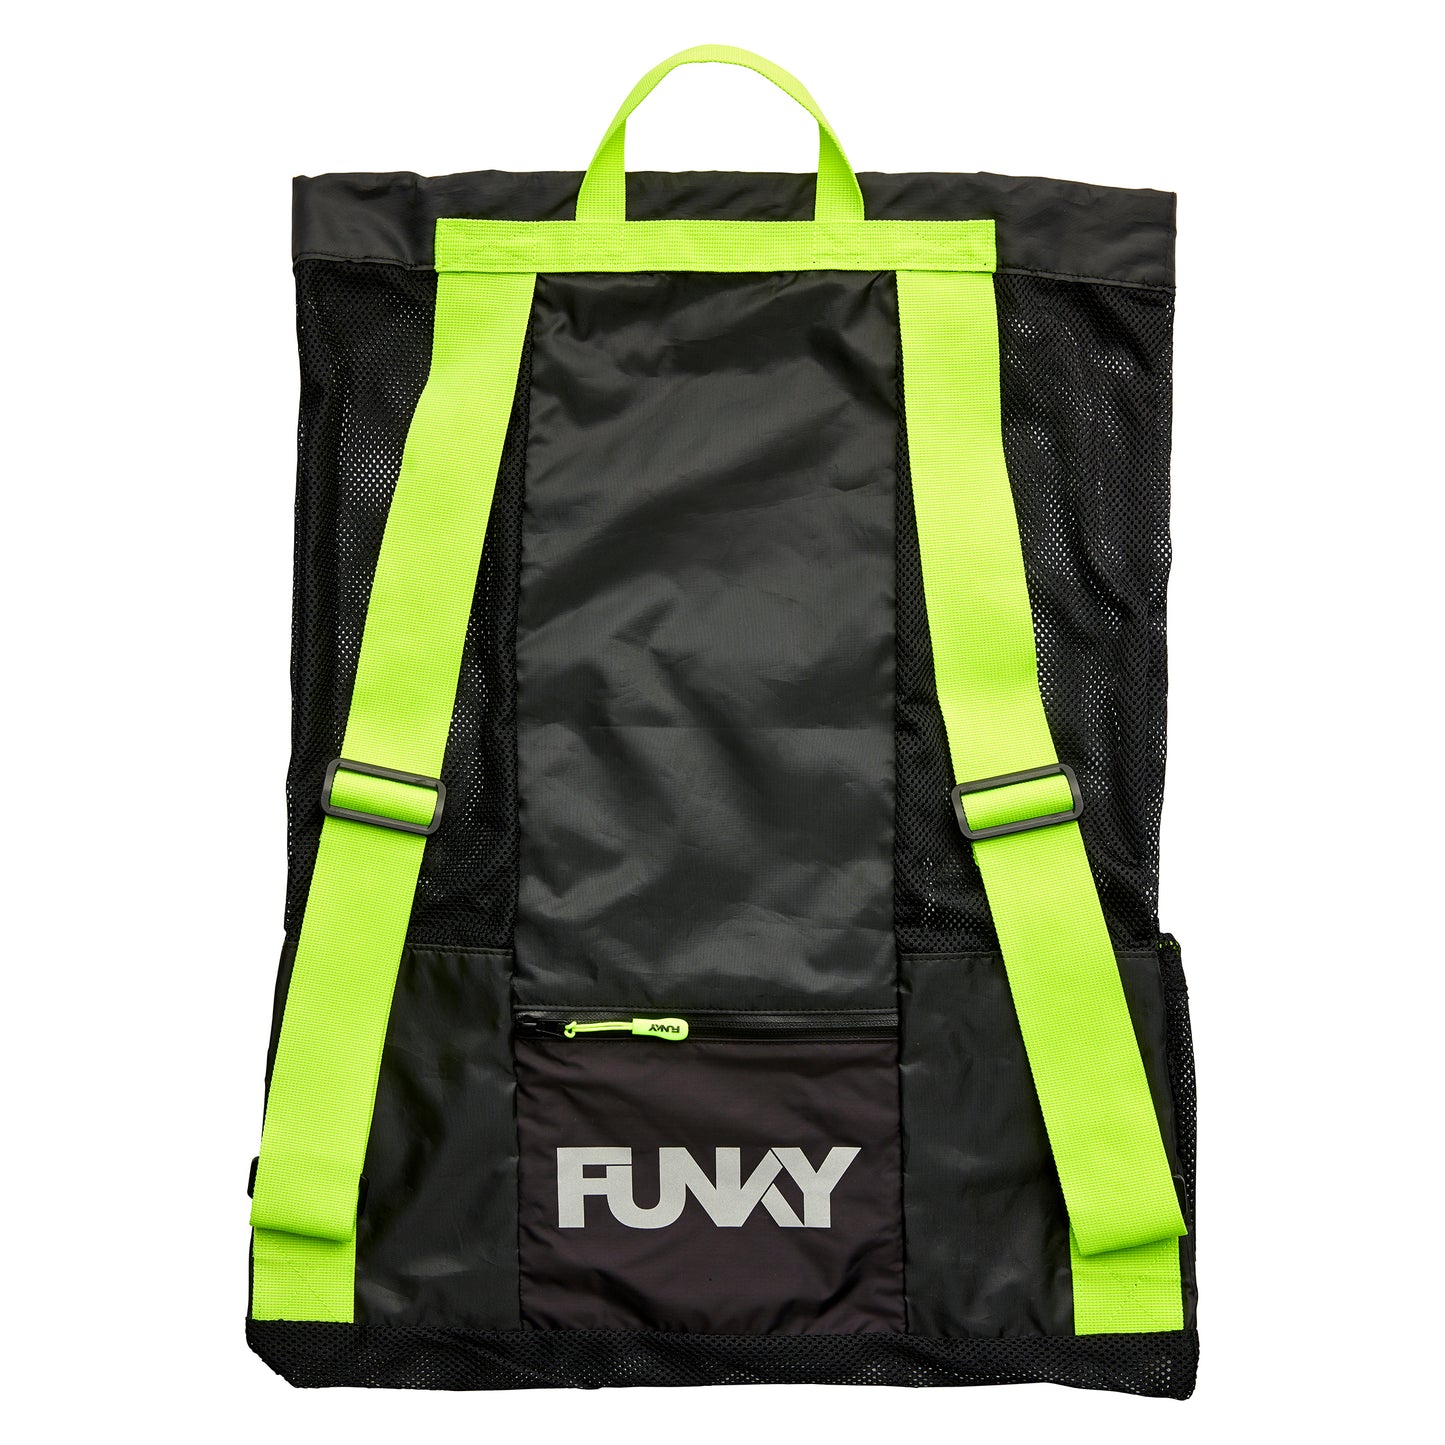 Funky Gear Up Mesh Backpack Night Lights